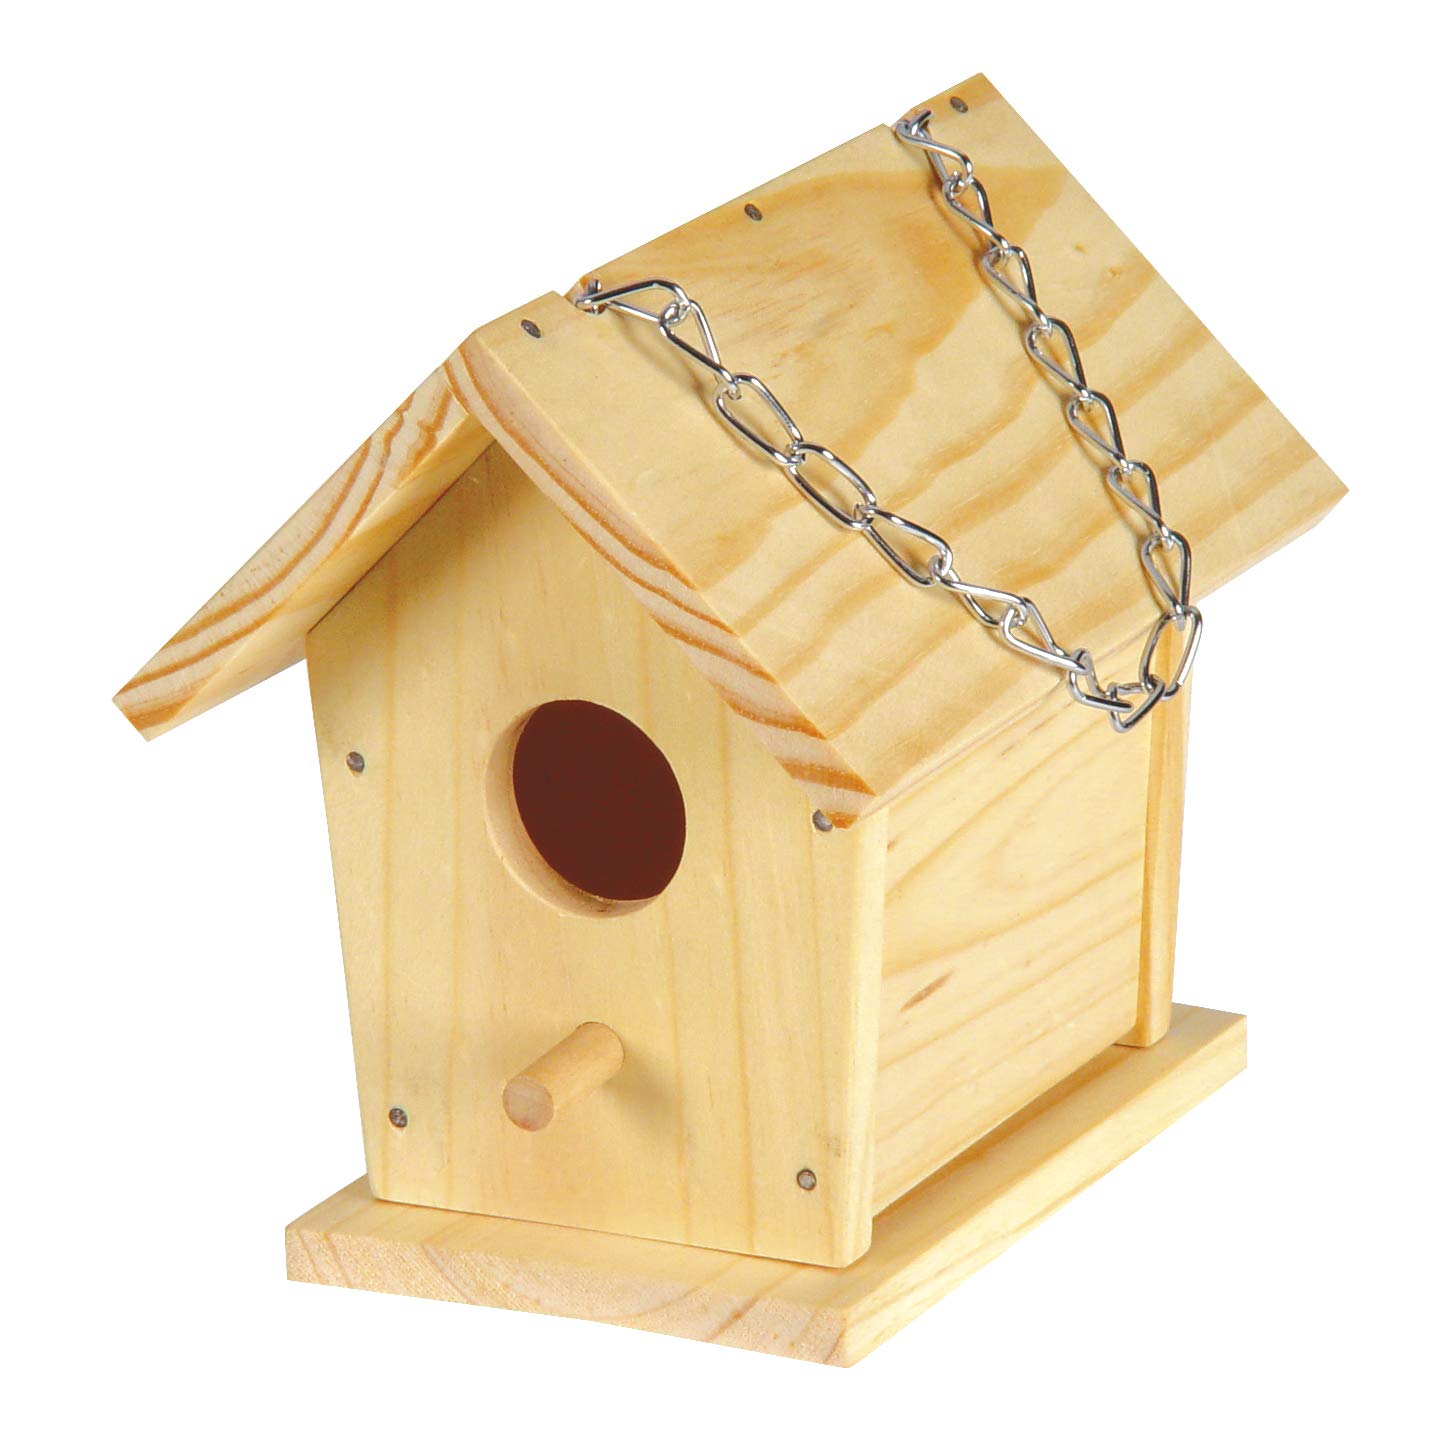 Toysmith Beetle & Bee Build A Bird Bungalow - DIY Kid Art Craft Outdoor Birdhouse Kit, 6" x 4" x 6", Hardware & glue included- 4 Paints, 1 Brush, 7 Wooden Pcs, Chain for Tree Hanging, Age 5+